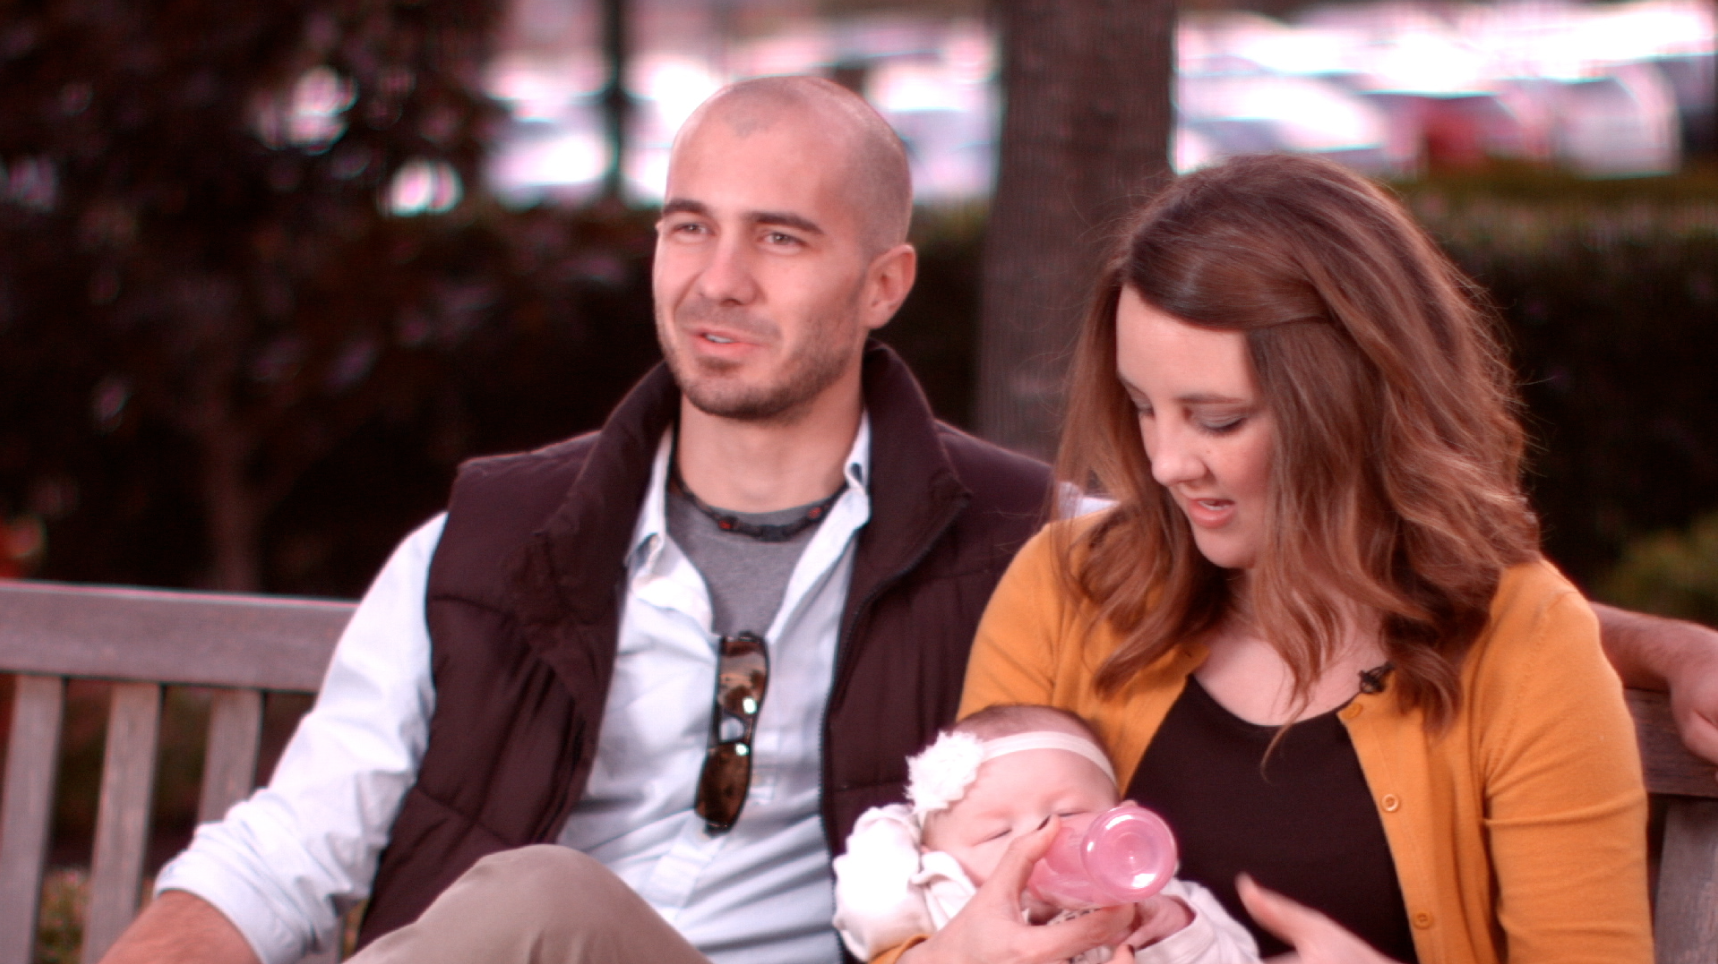 A Couple looking at their baby in a screenshot of the Baptist Health Corporation Video produced by Light Productions